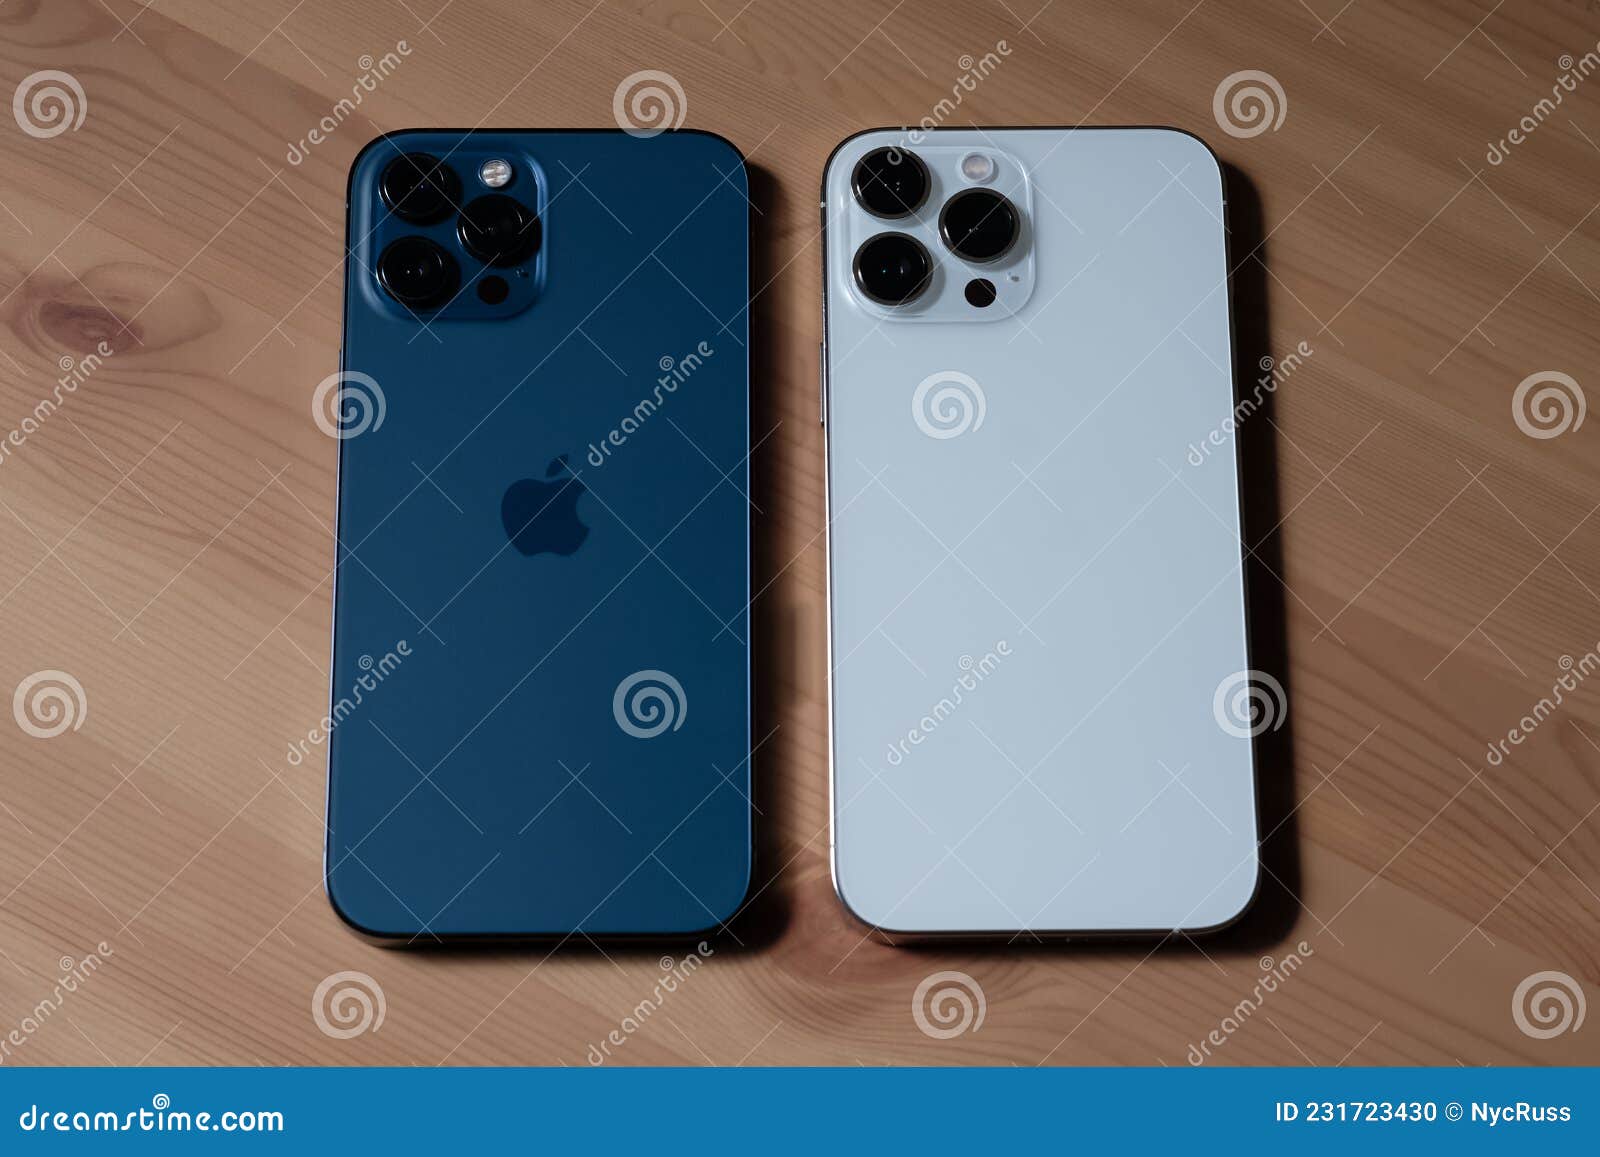 IPhone 13 Pro Max in Silver and IPhone 12 Pro Max in Pacific Blue